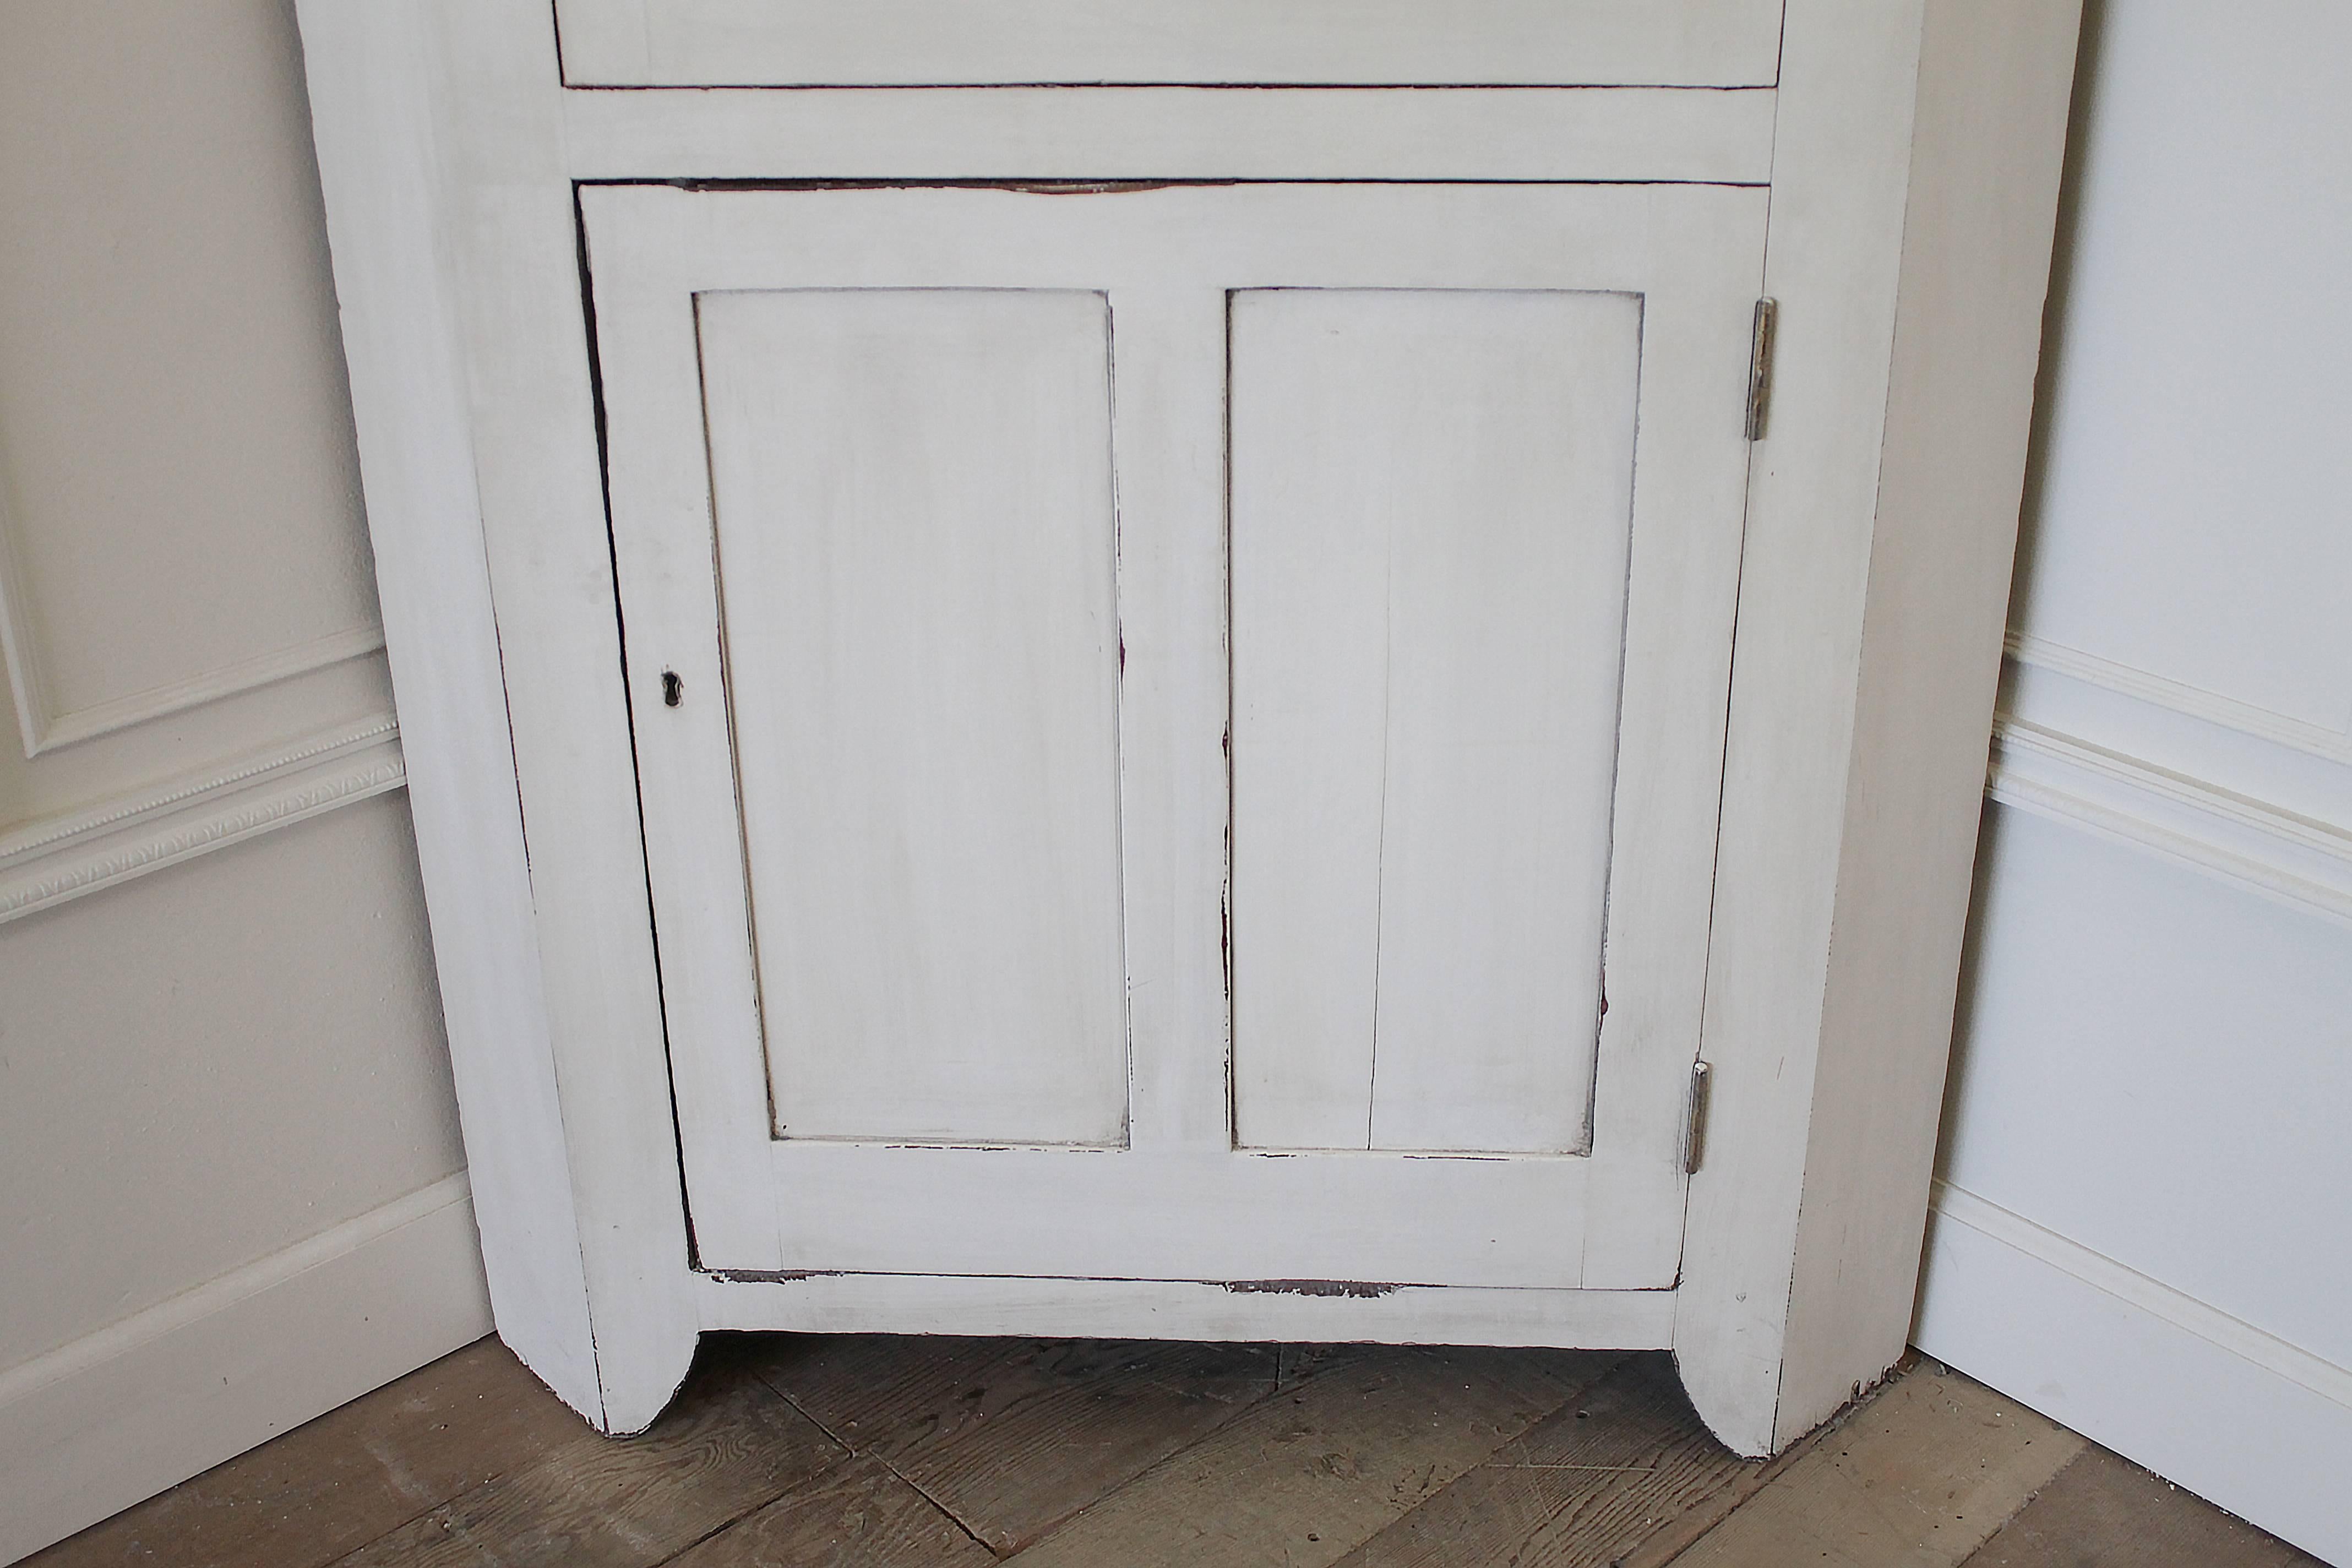 Painted in a subtle off-white with grey tones and original blue paint inside, circa 1870 doors open and close with ease, all the glass panes look to be original with a subtle waviness to the glass.
Measures: 43